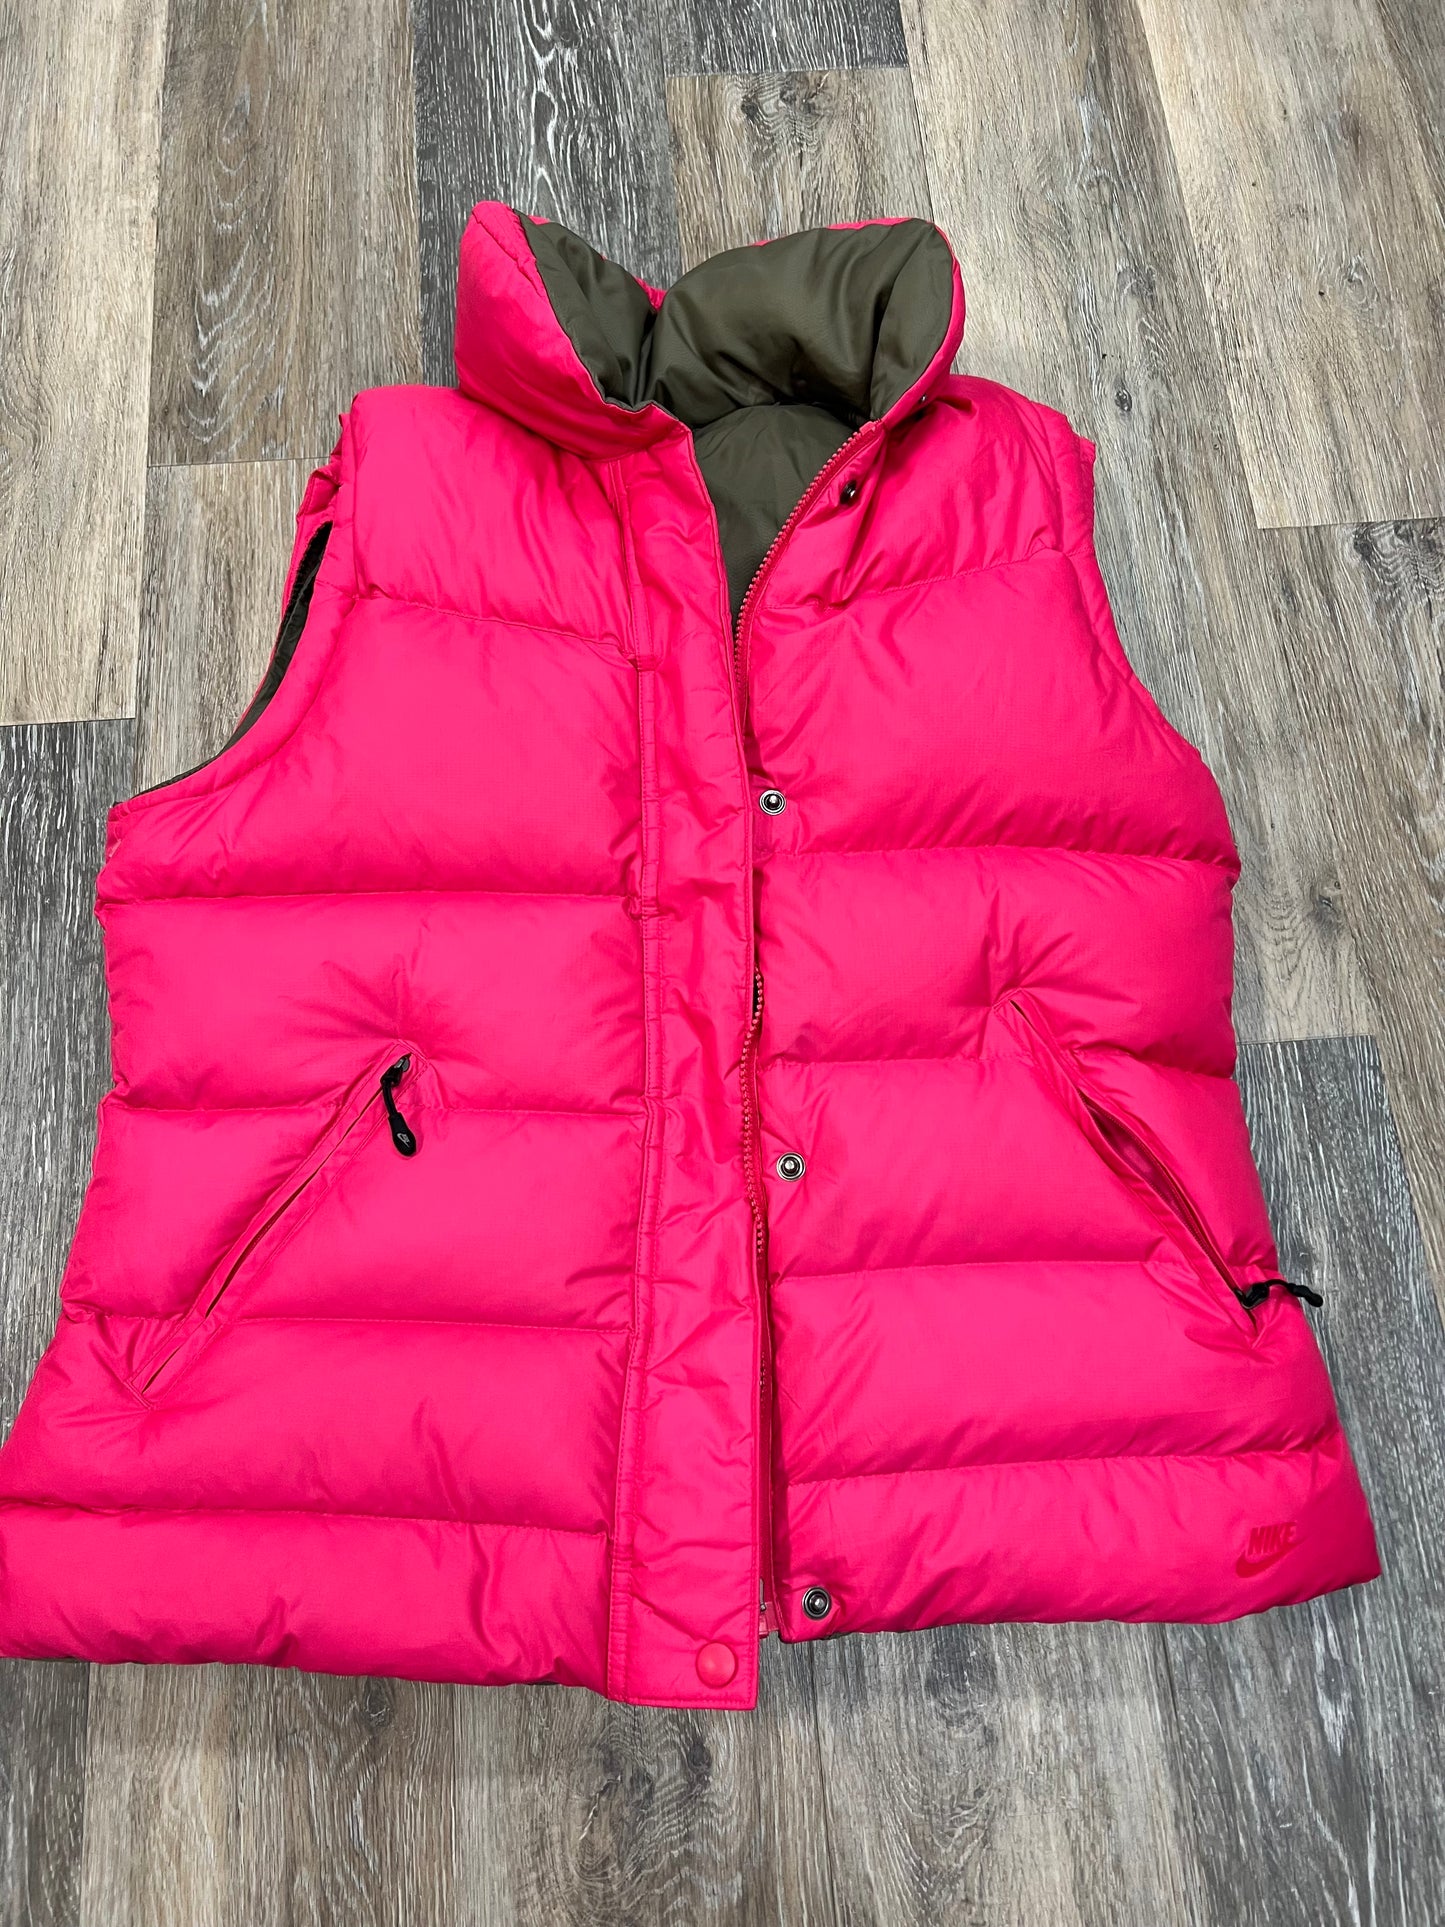 Vest Puffer & Quilted By Nike Apparel  Size: M